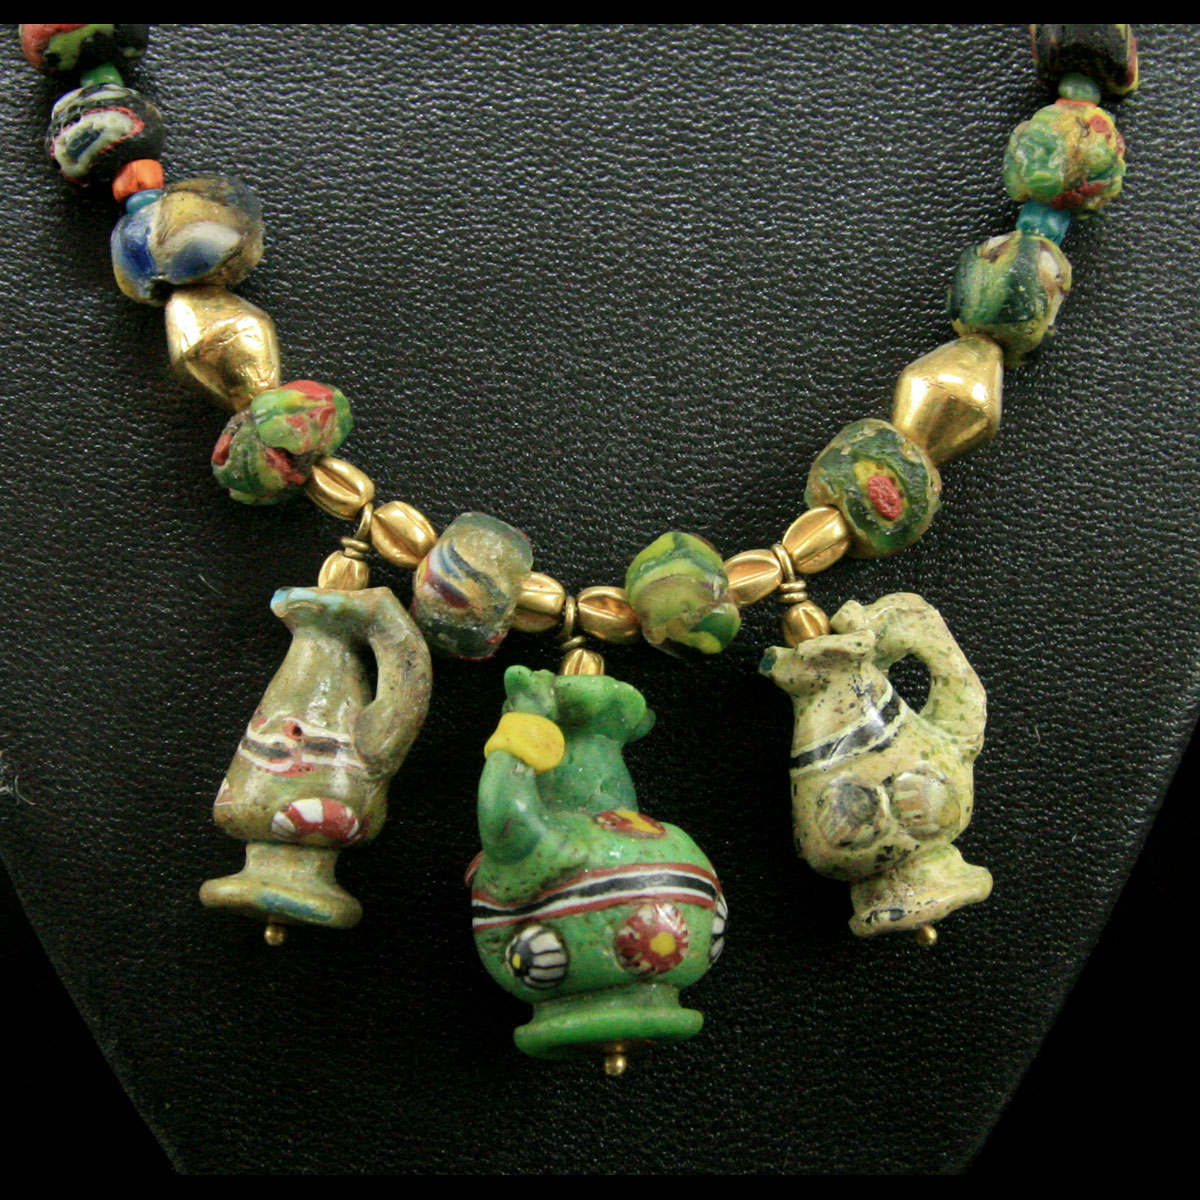 Islamic : A fine Persian and Roman-Egyptian glass bead necklace with ...